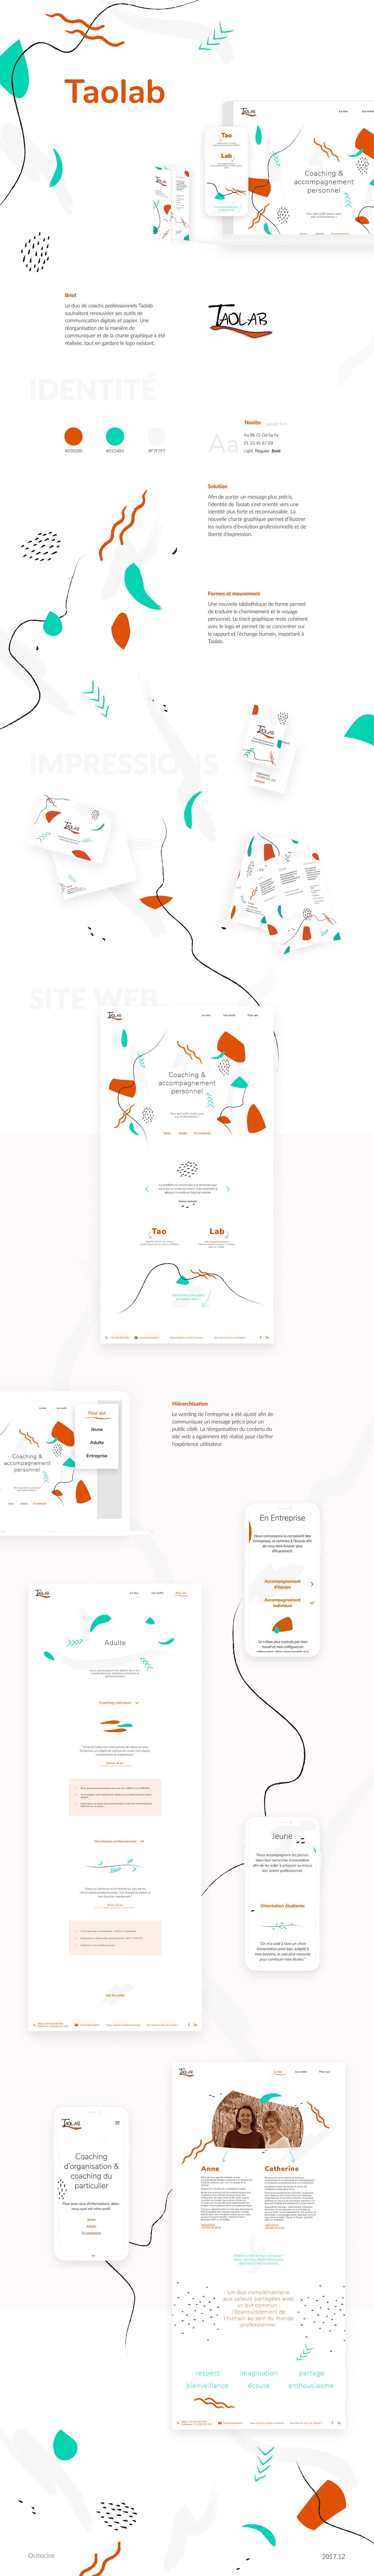 graphic design  ux UI ILLUSTRATION  abstract brand Interface Webdesign communication